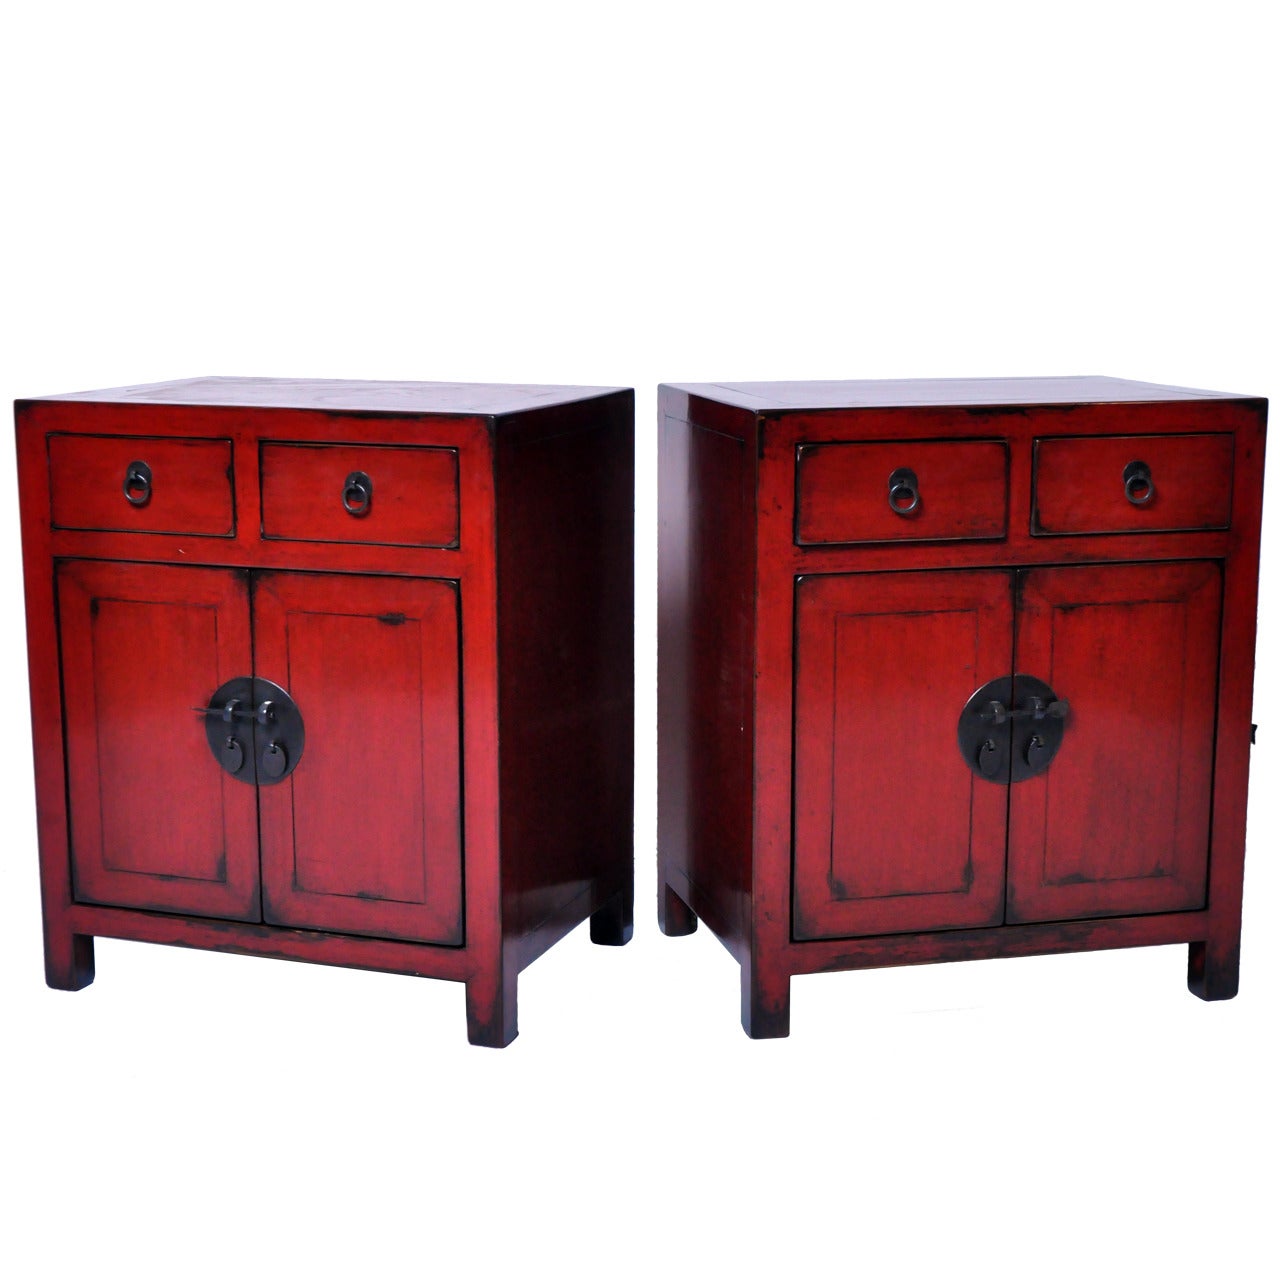 A Red Lacquered, Chinese Bedside Chest